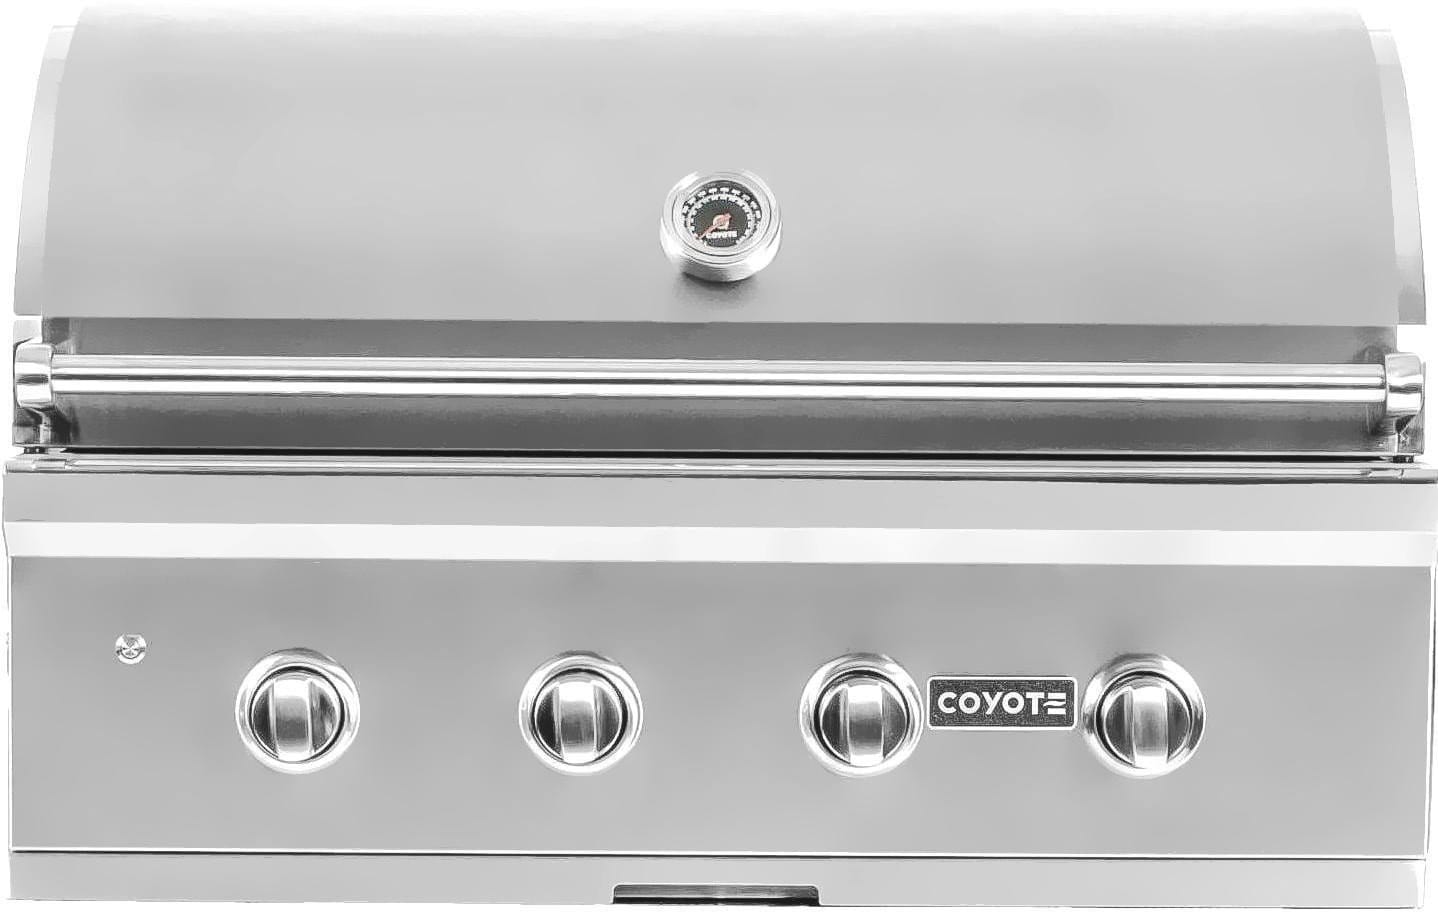 Coyote Grill Coyote C-Series 36" Grill 4 Burner C2C36